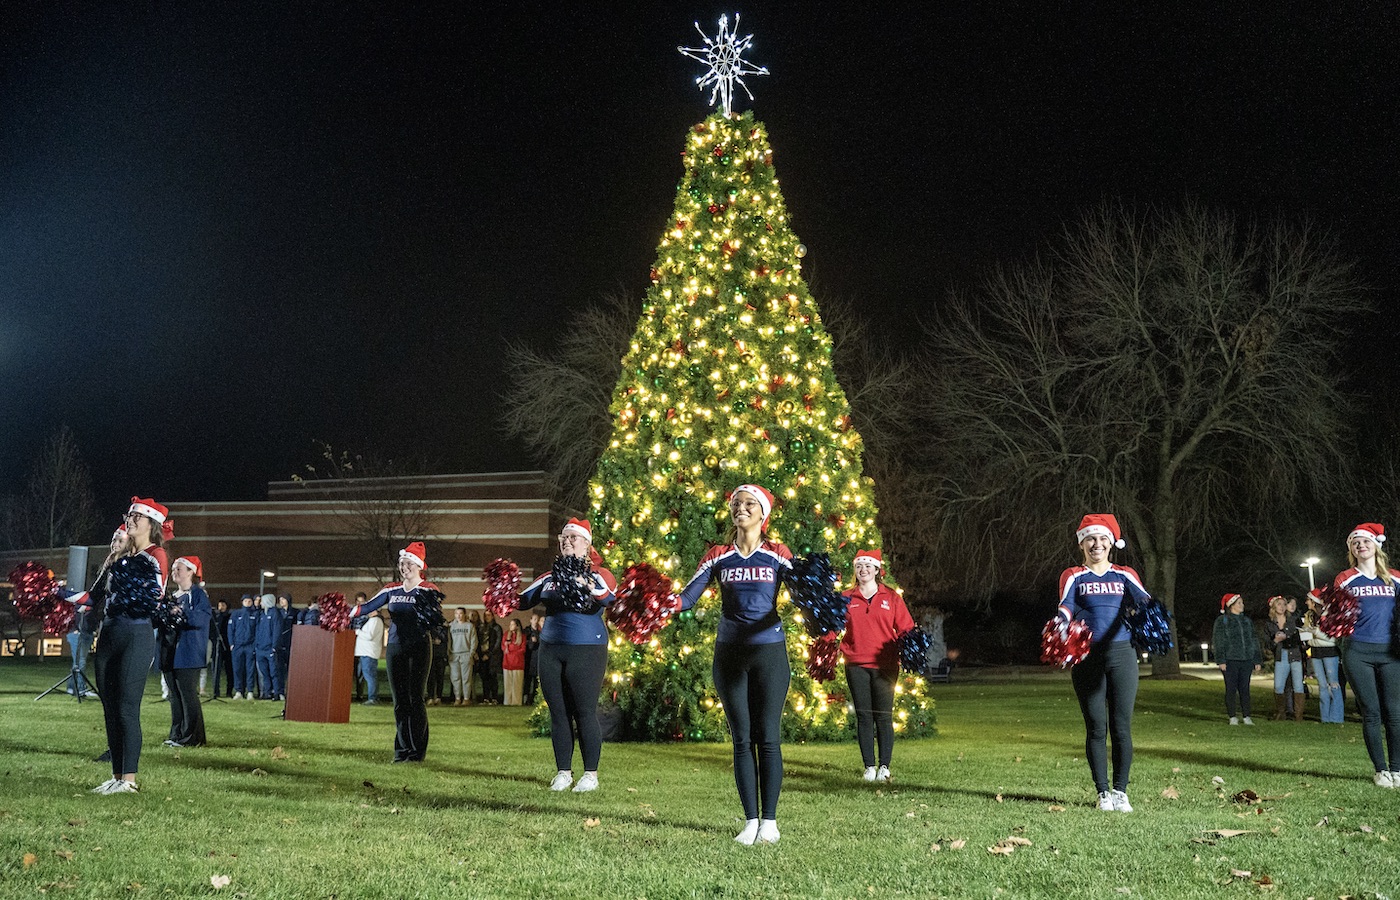 DeSales Cheer Team performing in front of Christmas tree on campus mall